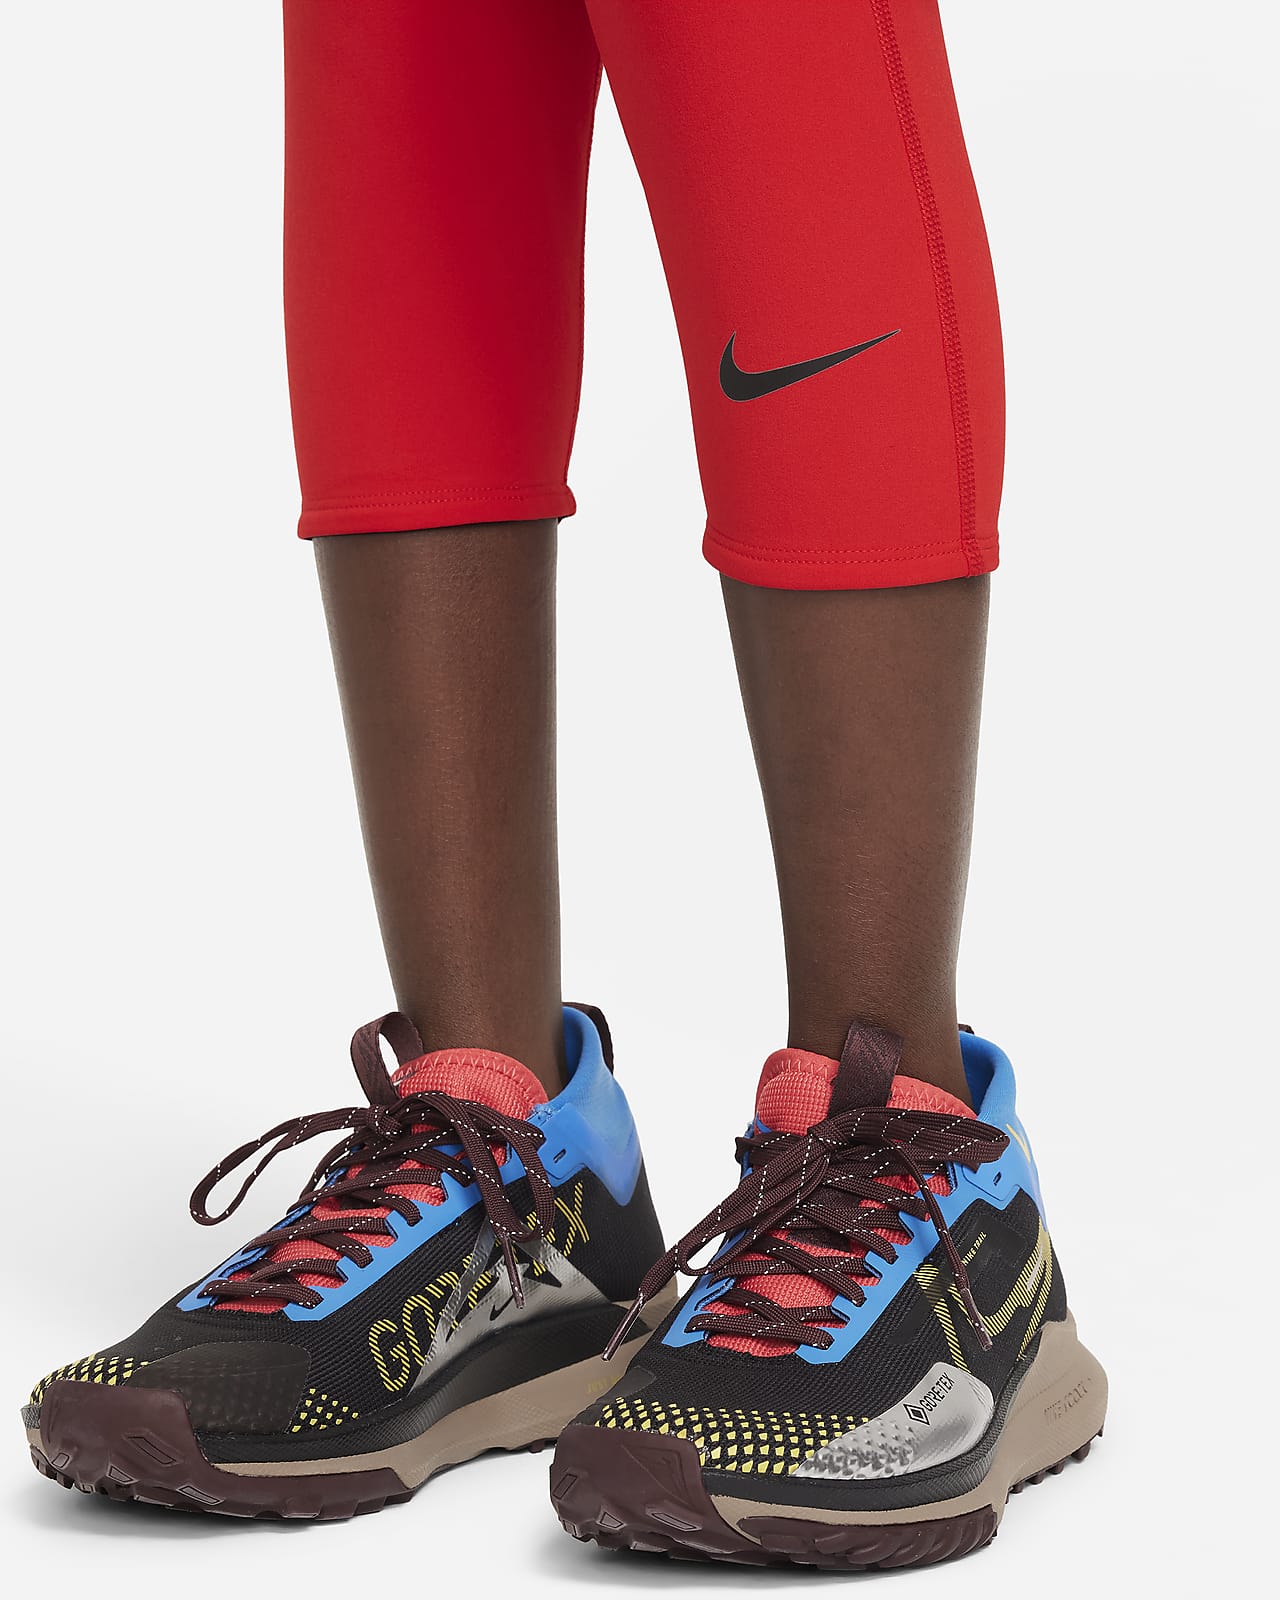 Nike Men's Pro ¾ Length Tights : : Clothing, Shoes & Accessories